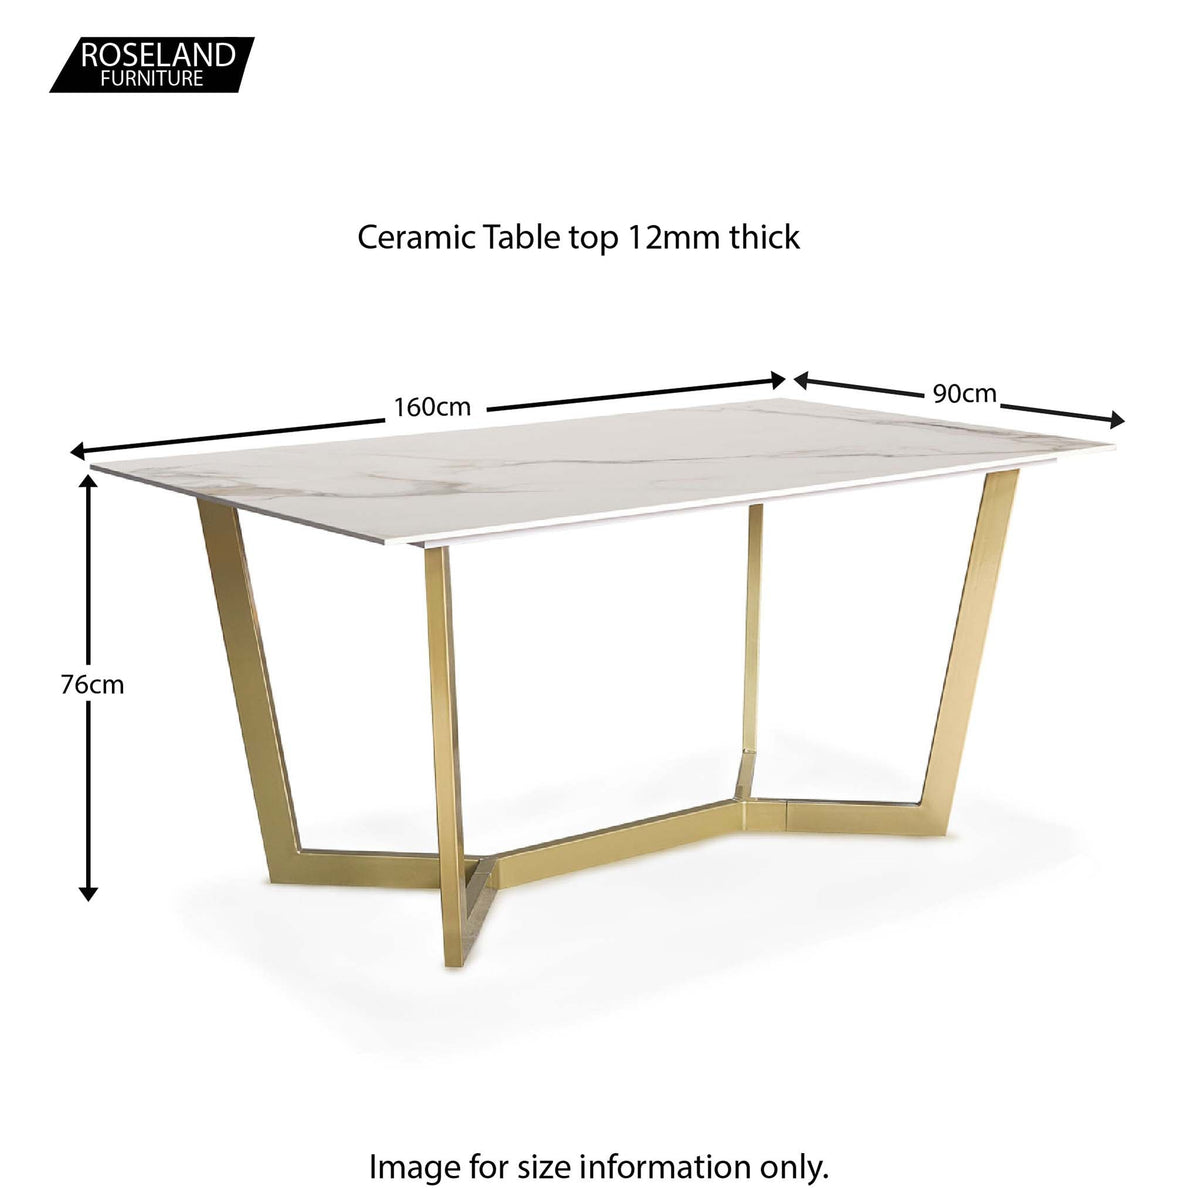 Hayden 160cm Ceramic Dining Table - Size Guide